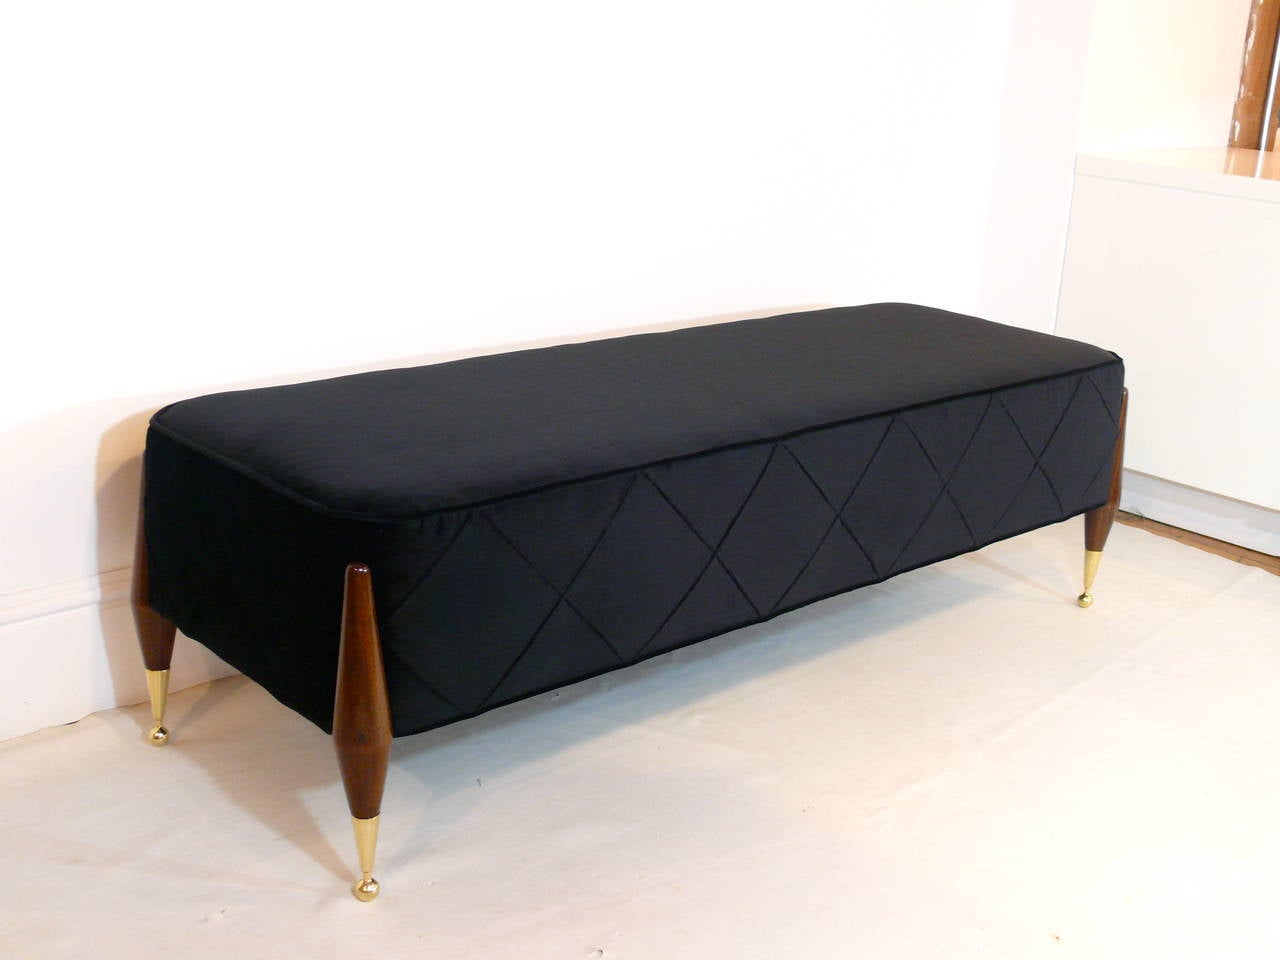 Imperial ball foot bench designed by Irwin Feld Design for CF Modern. This bench features four corner sculptural walnut legs and beautiful brass ball foot sabots holding a plush custom rectangular cushion (shown here in a black velvet). Available